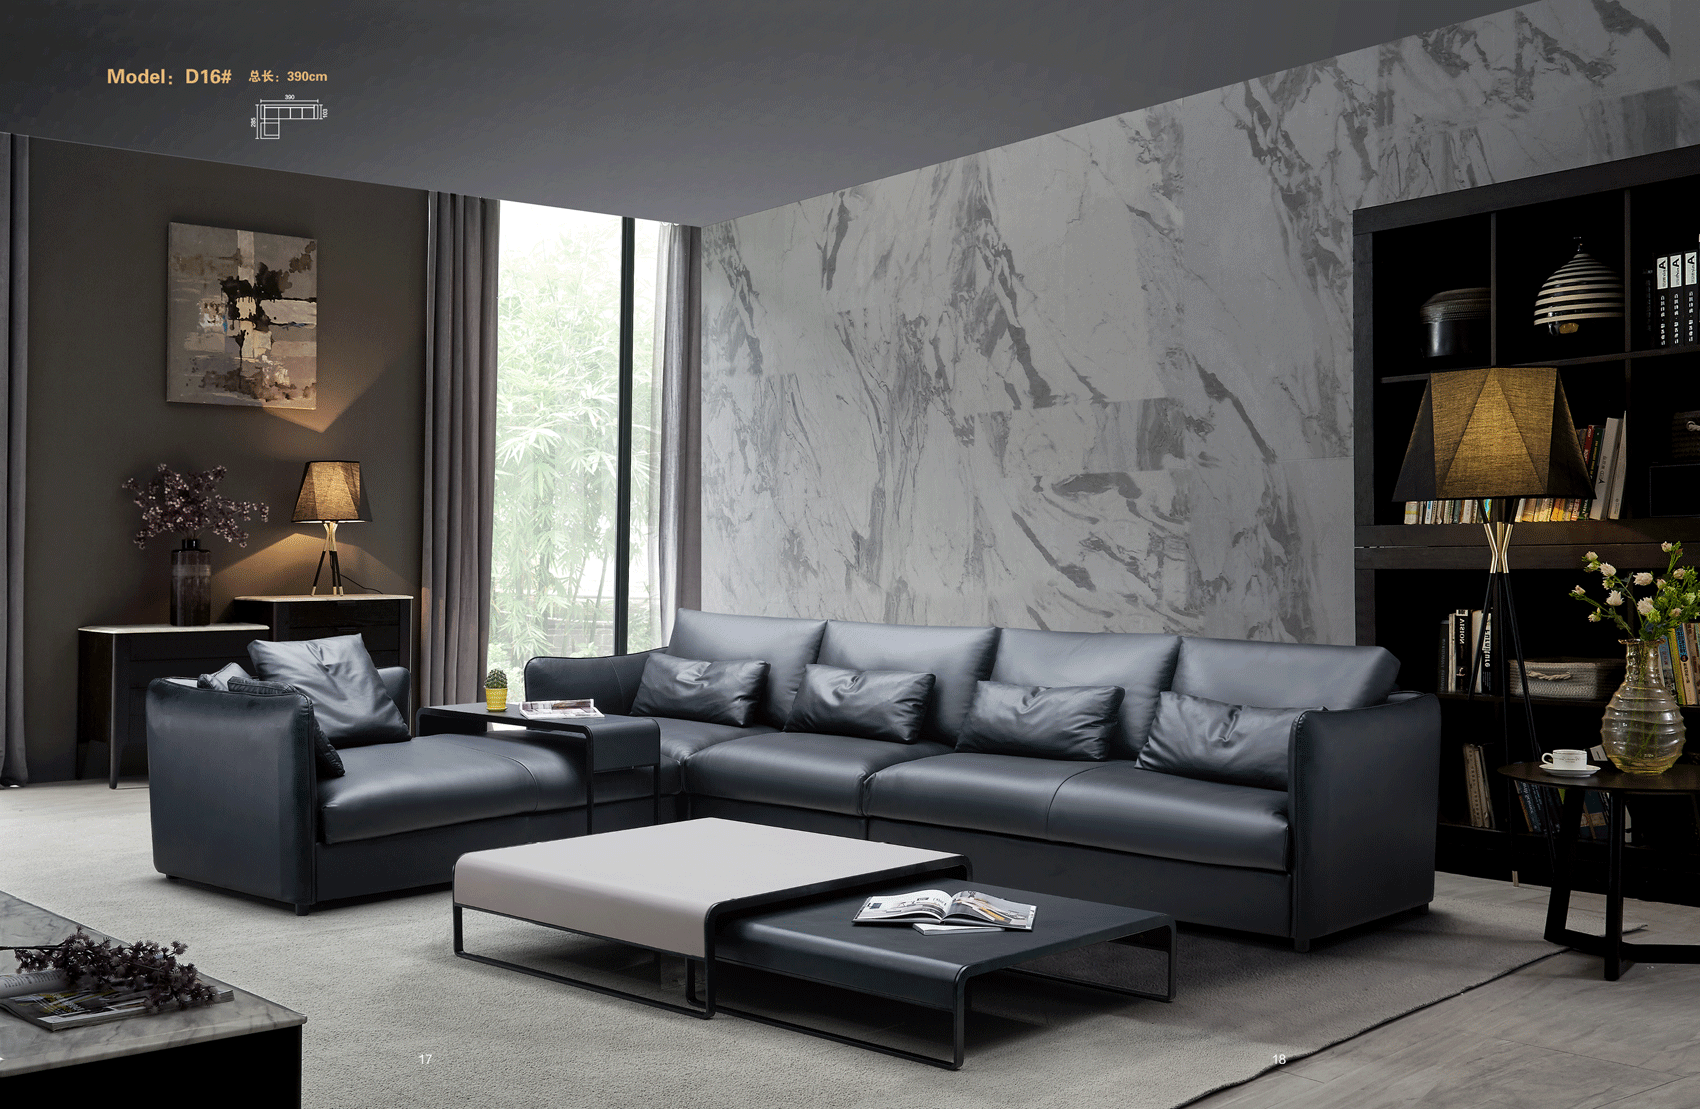 Brands Formerin Classic Living Room, Italy D16 Sectional